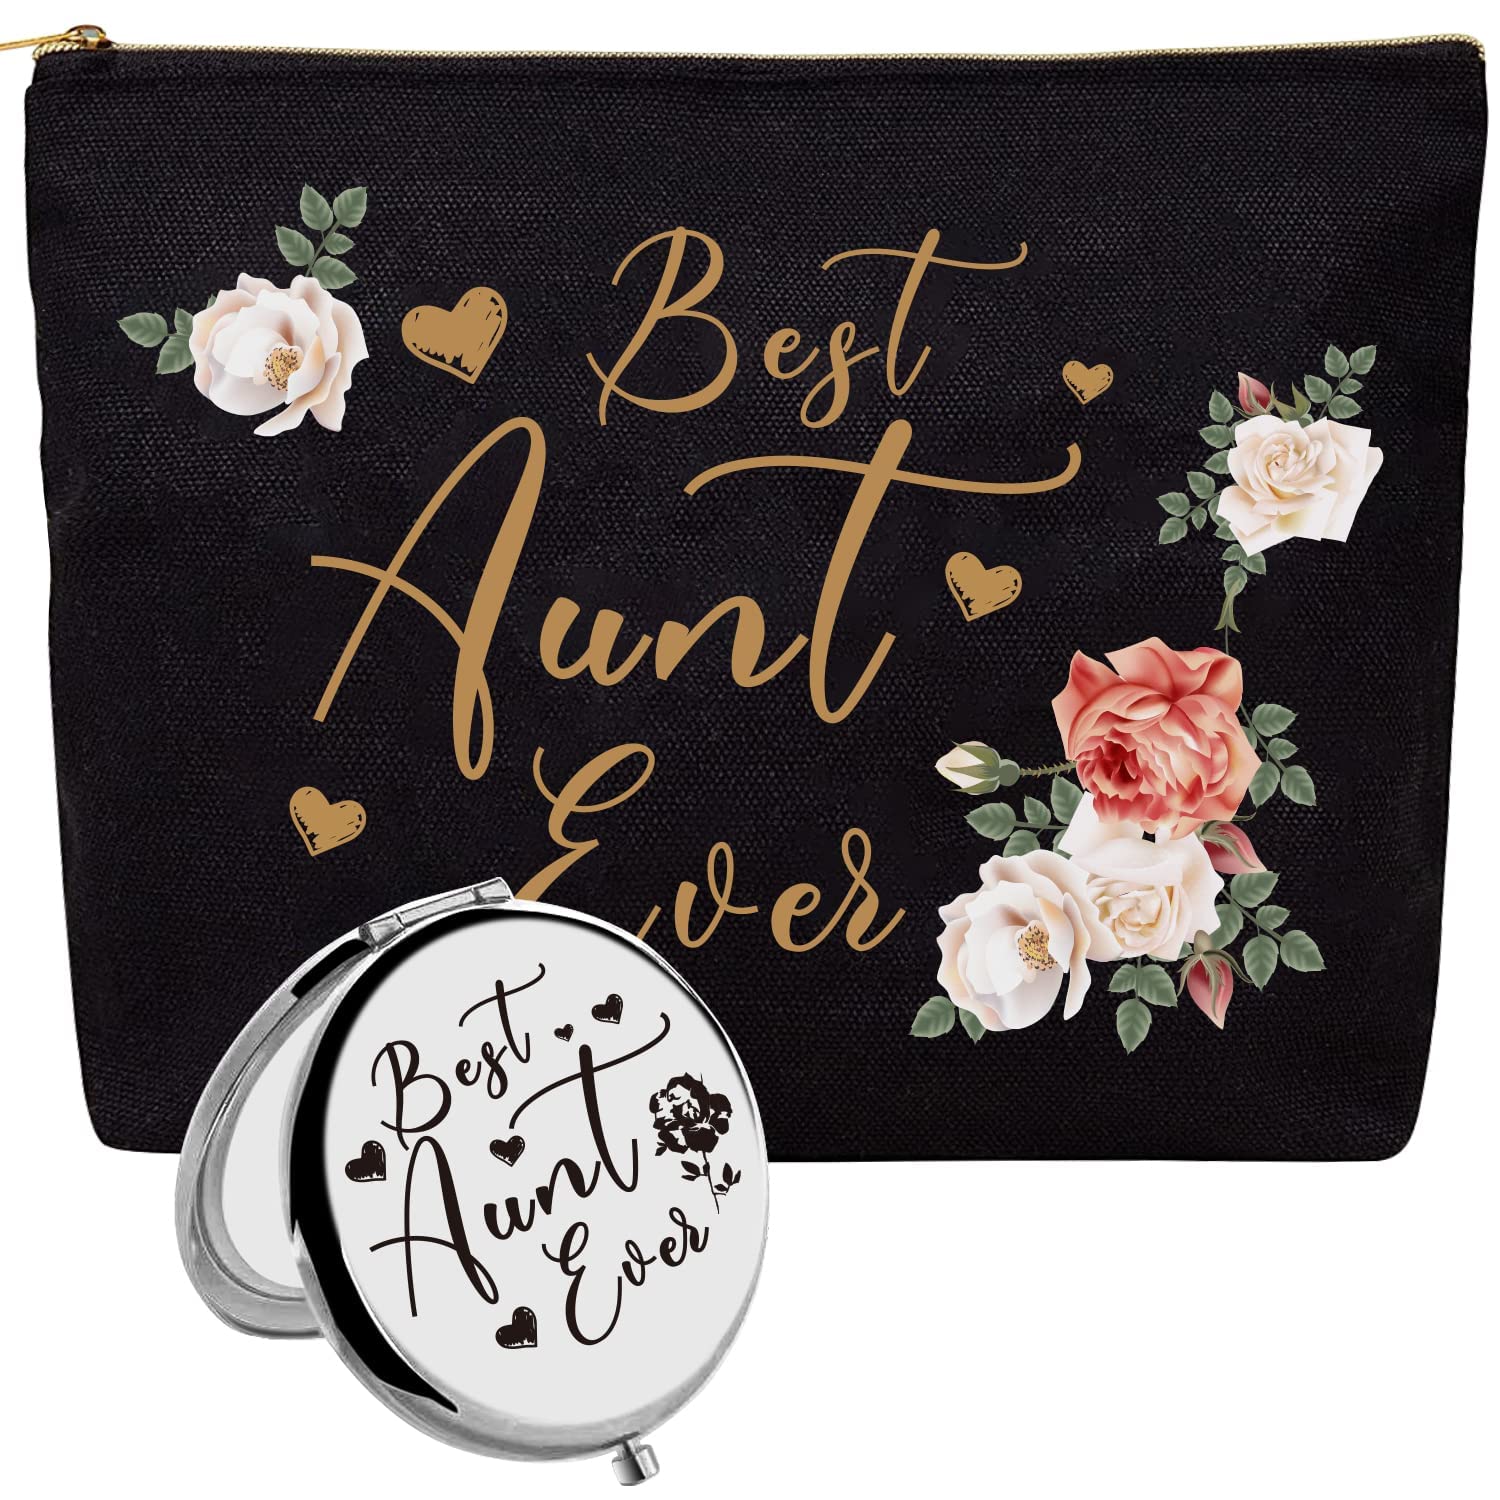 HnoonZ Best Aunt Ever Gifts Aunt Gift Aunt Gifts from Niece Auntie Gifts  Aunt Bday Gift from Niece Gifts for Aunt Birthday Gifts for Aunt Aunt  Compact Mirror Best Aunt Makeup Bag